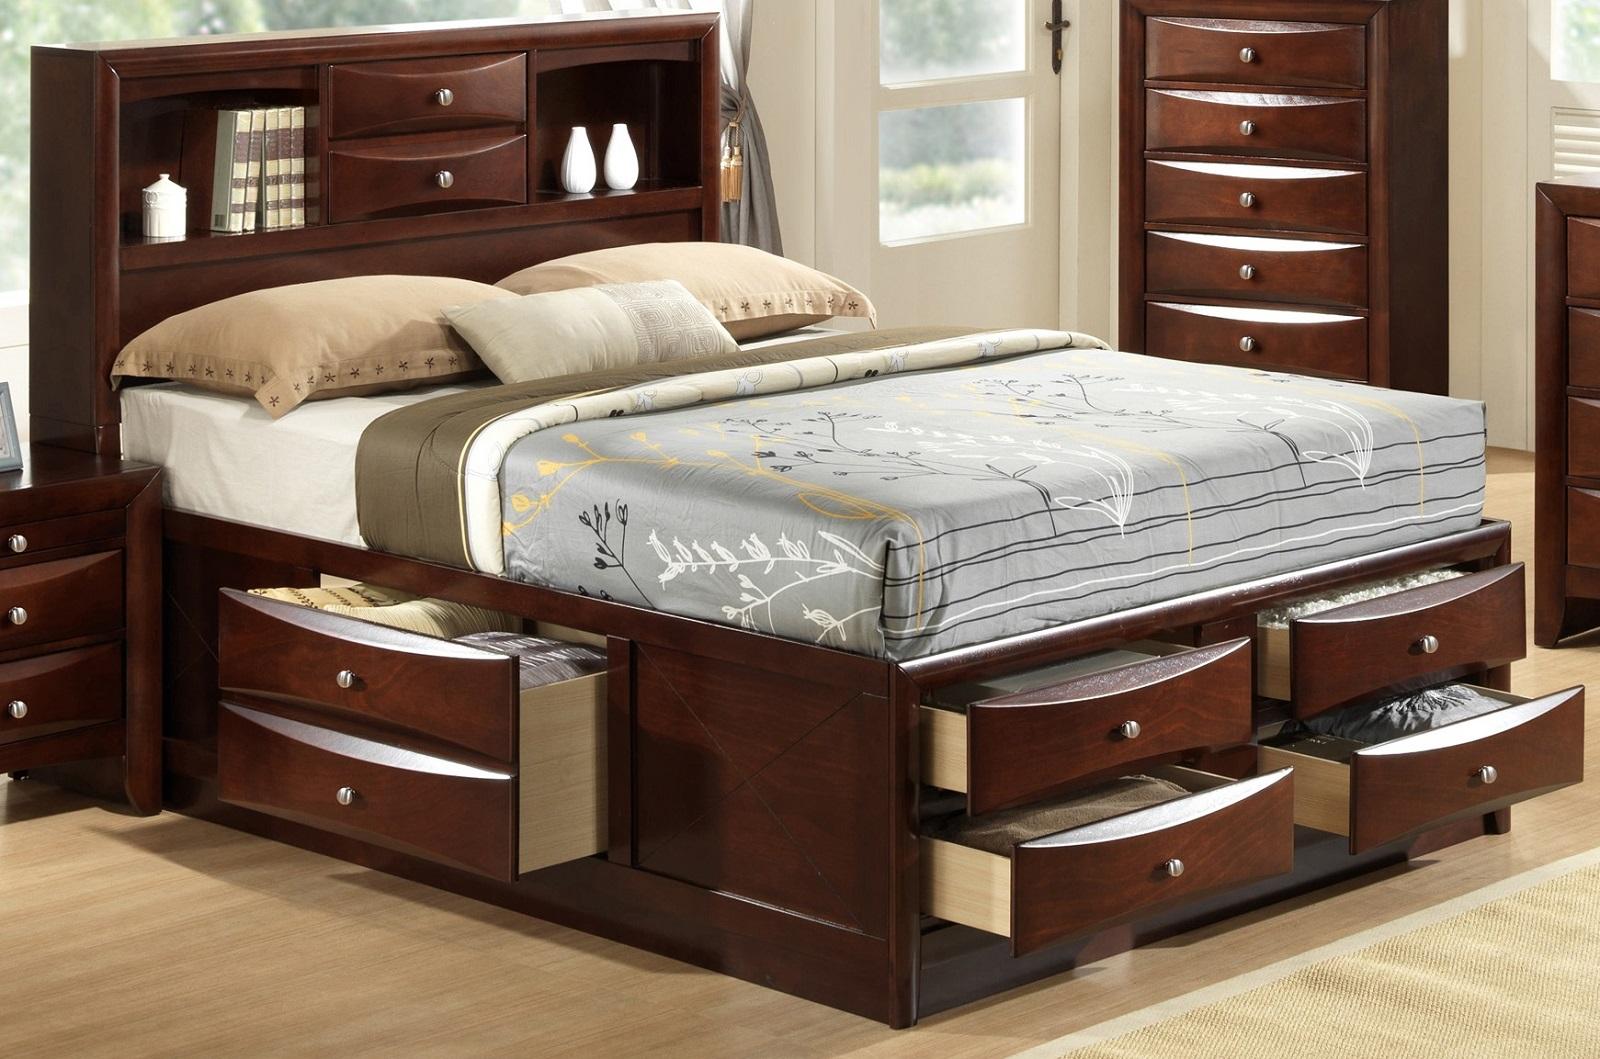 

    
Galaxy Home Furniture EMILY Storage Bedroom Set Cherry GHF-808857567017
